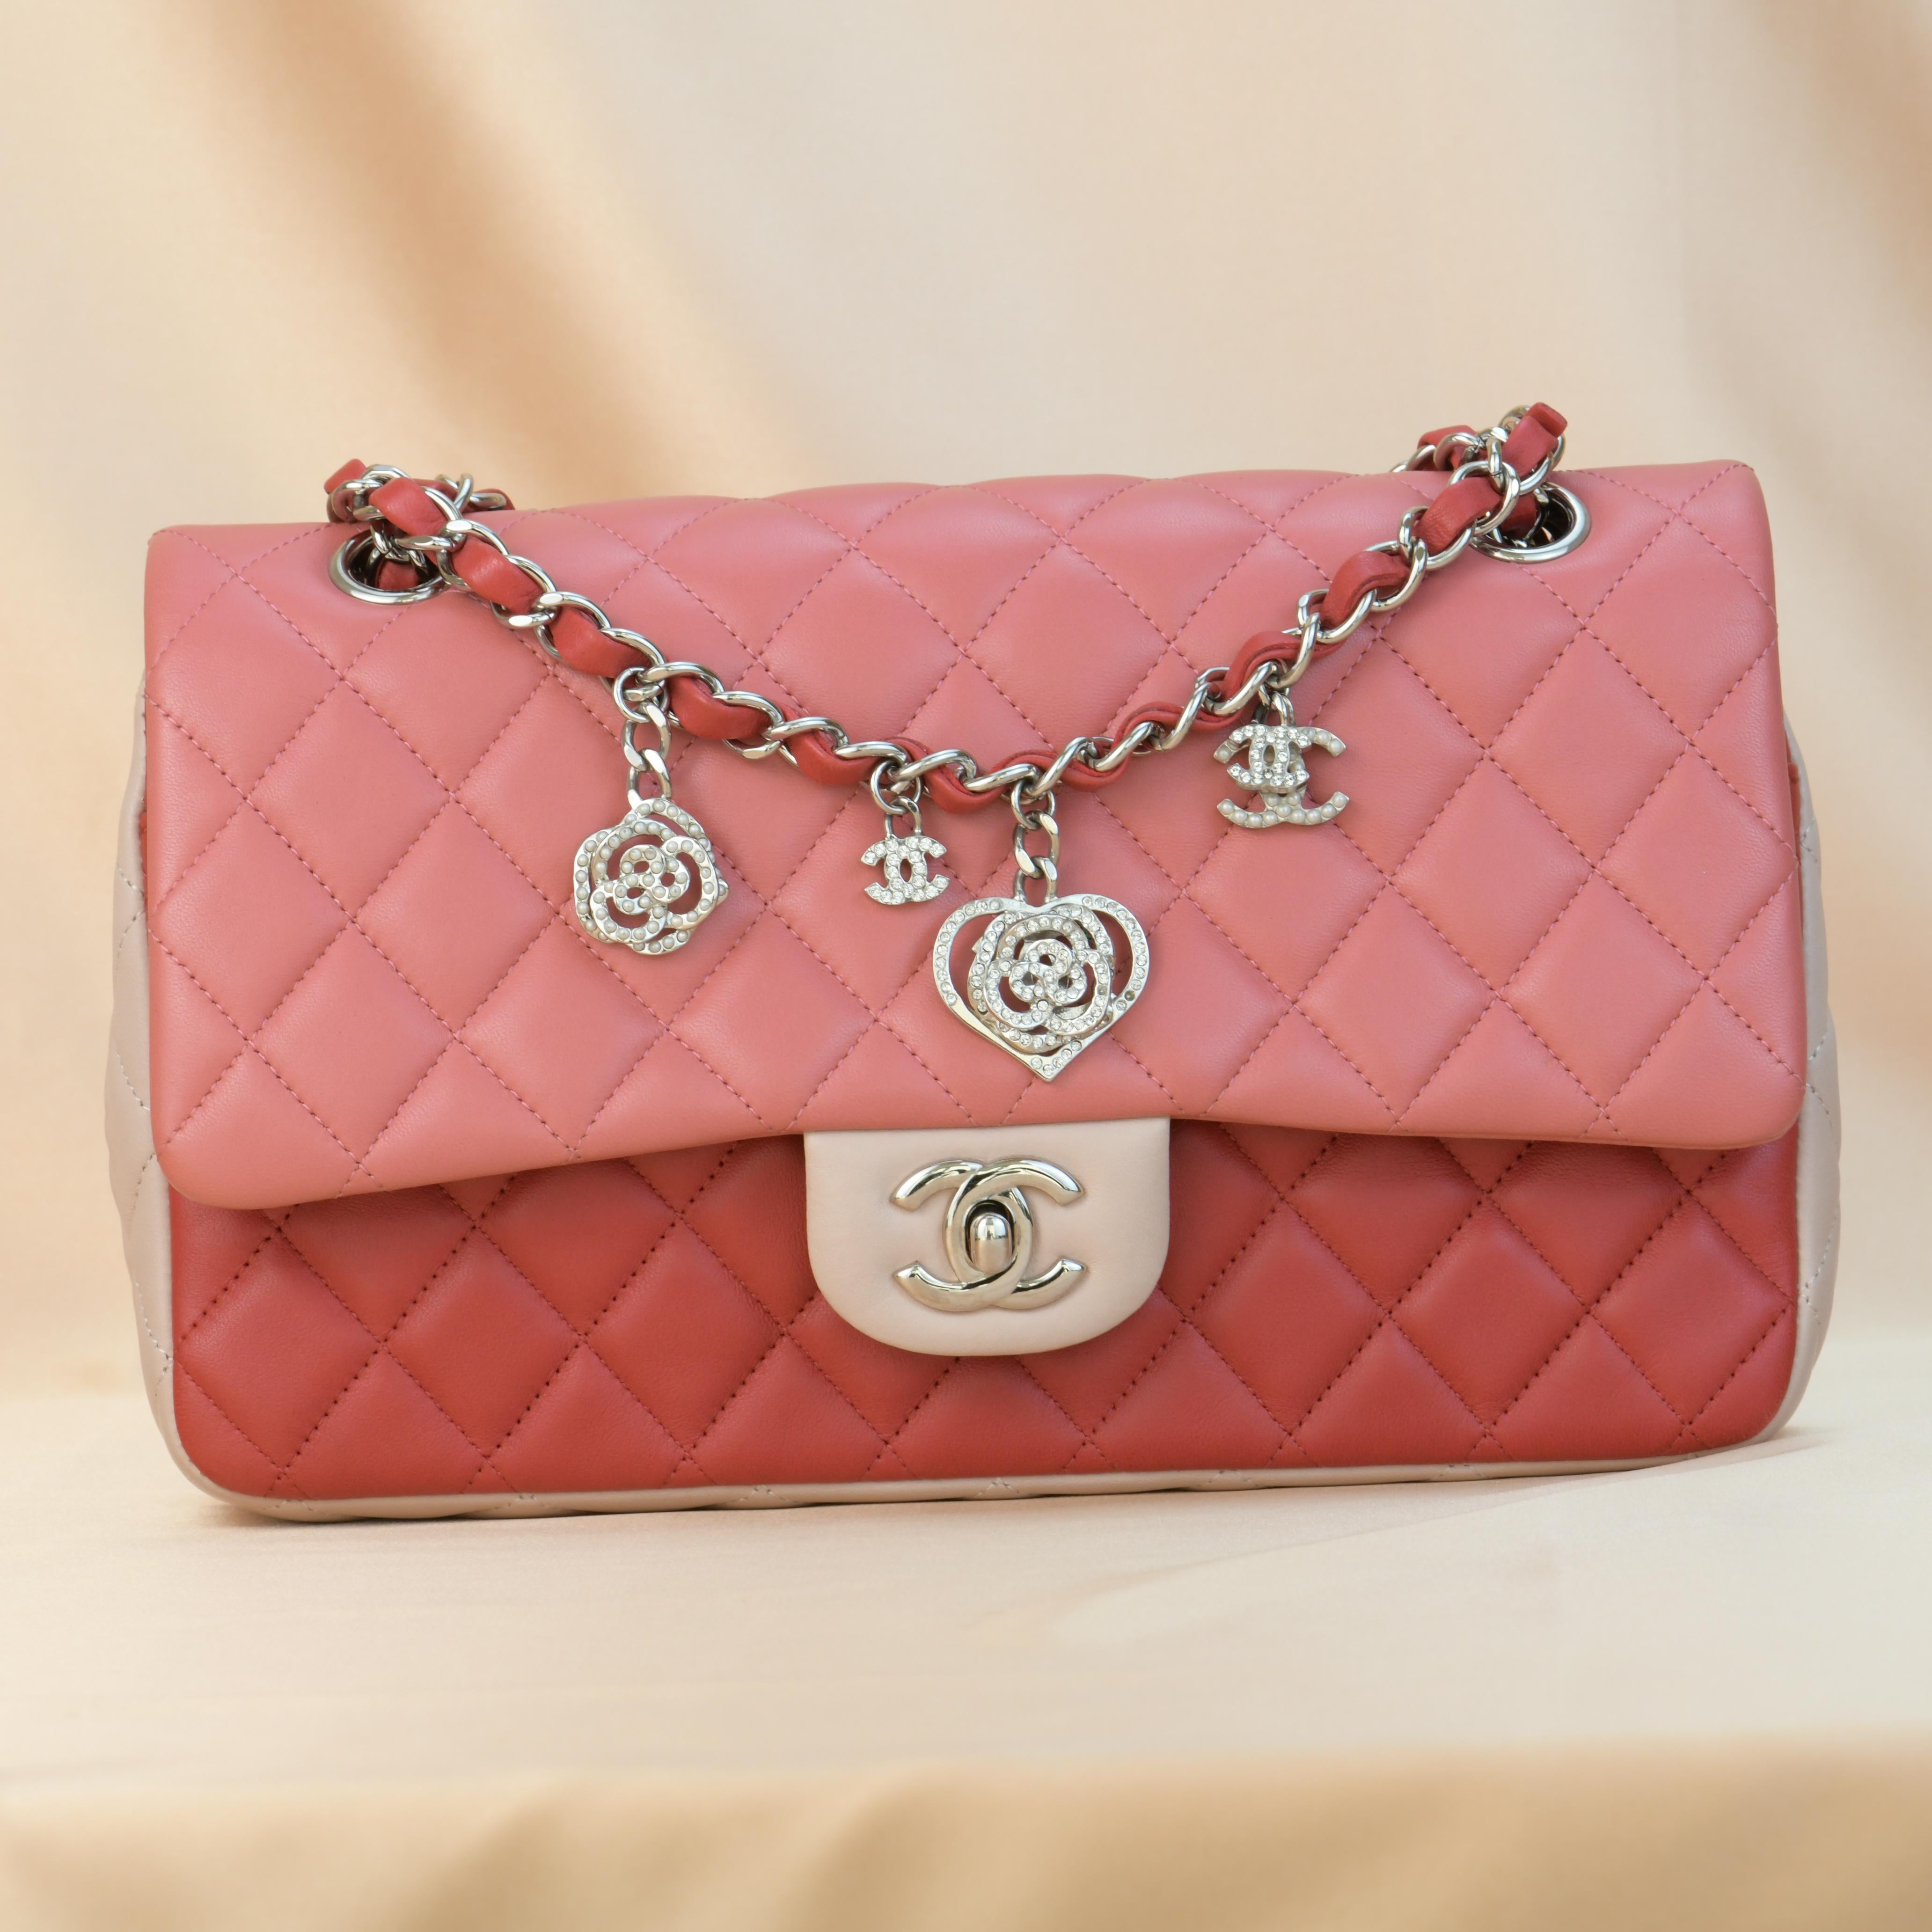 Brand	Chanel
Model	Timeless
Serial No.	19******
Color	Multi-Pink
Date	Approx. 2014
Metal	Silver
Material	Lambskin
Measurements	Approx. 15 x 25 x 6 cm
Condition	Excellent 
Comes with	Chanel Dust bag and Authentic Card

If you are interested in any of